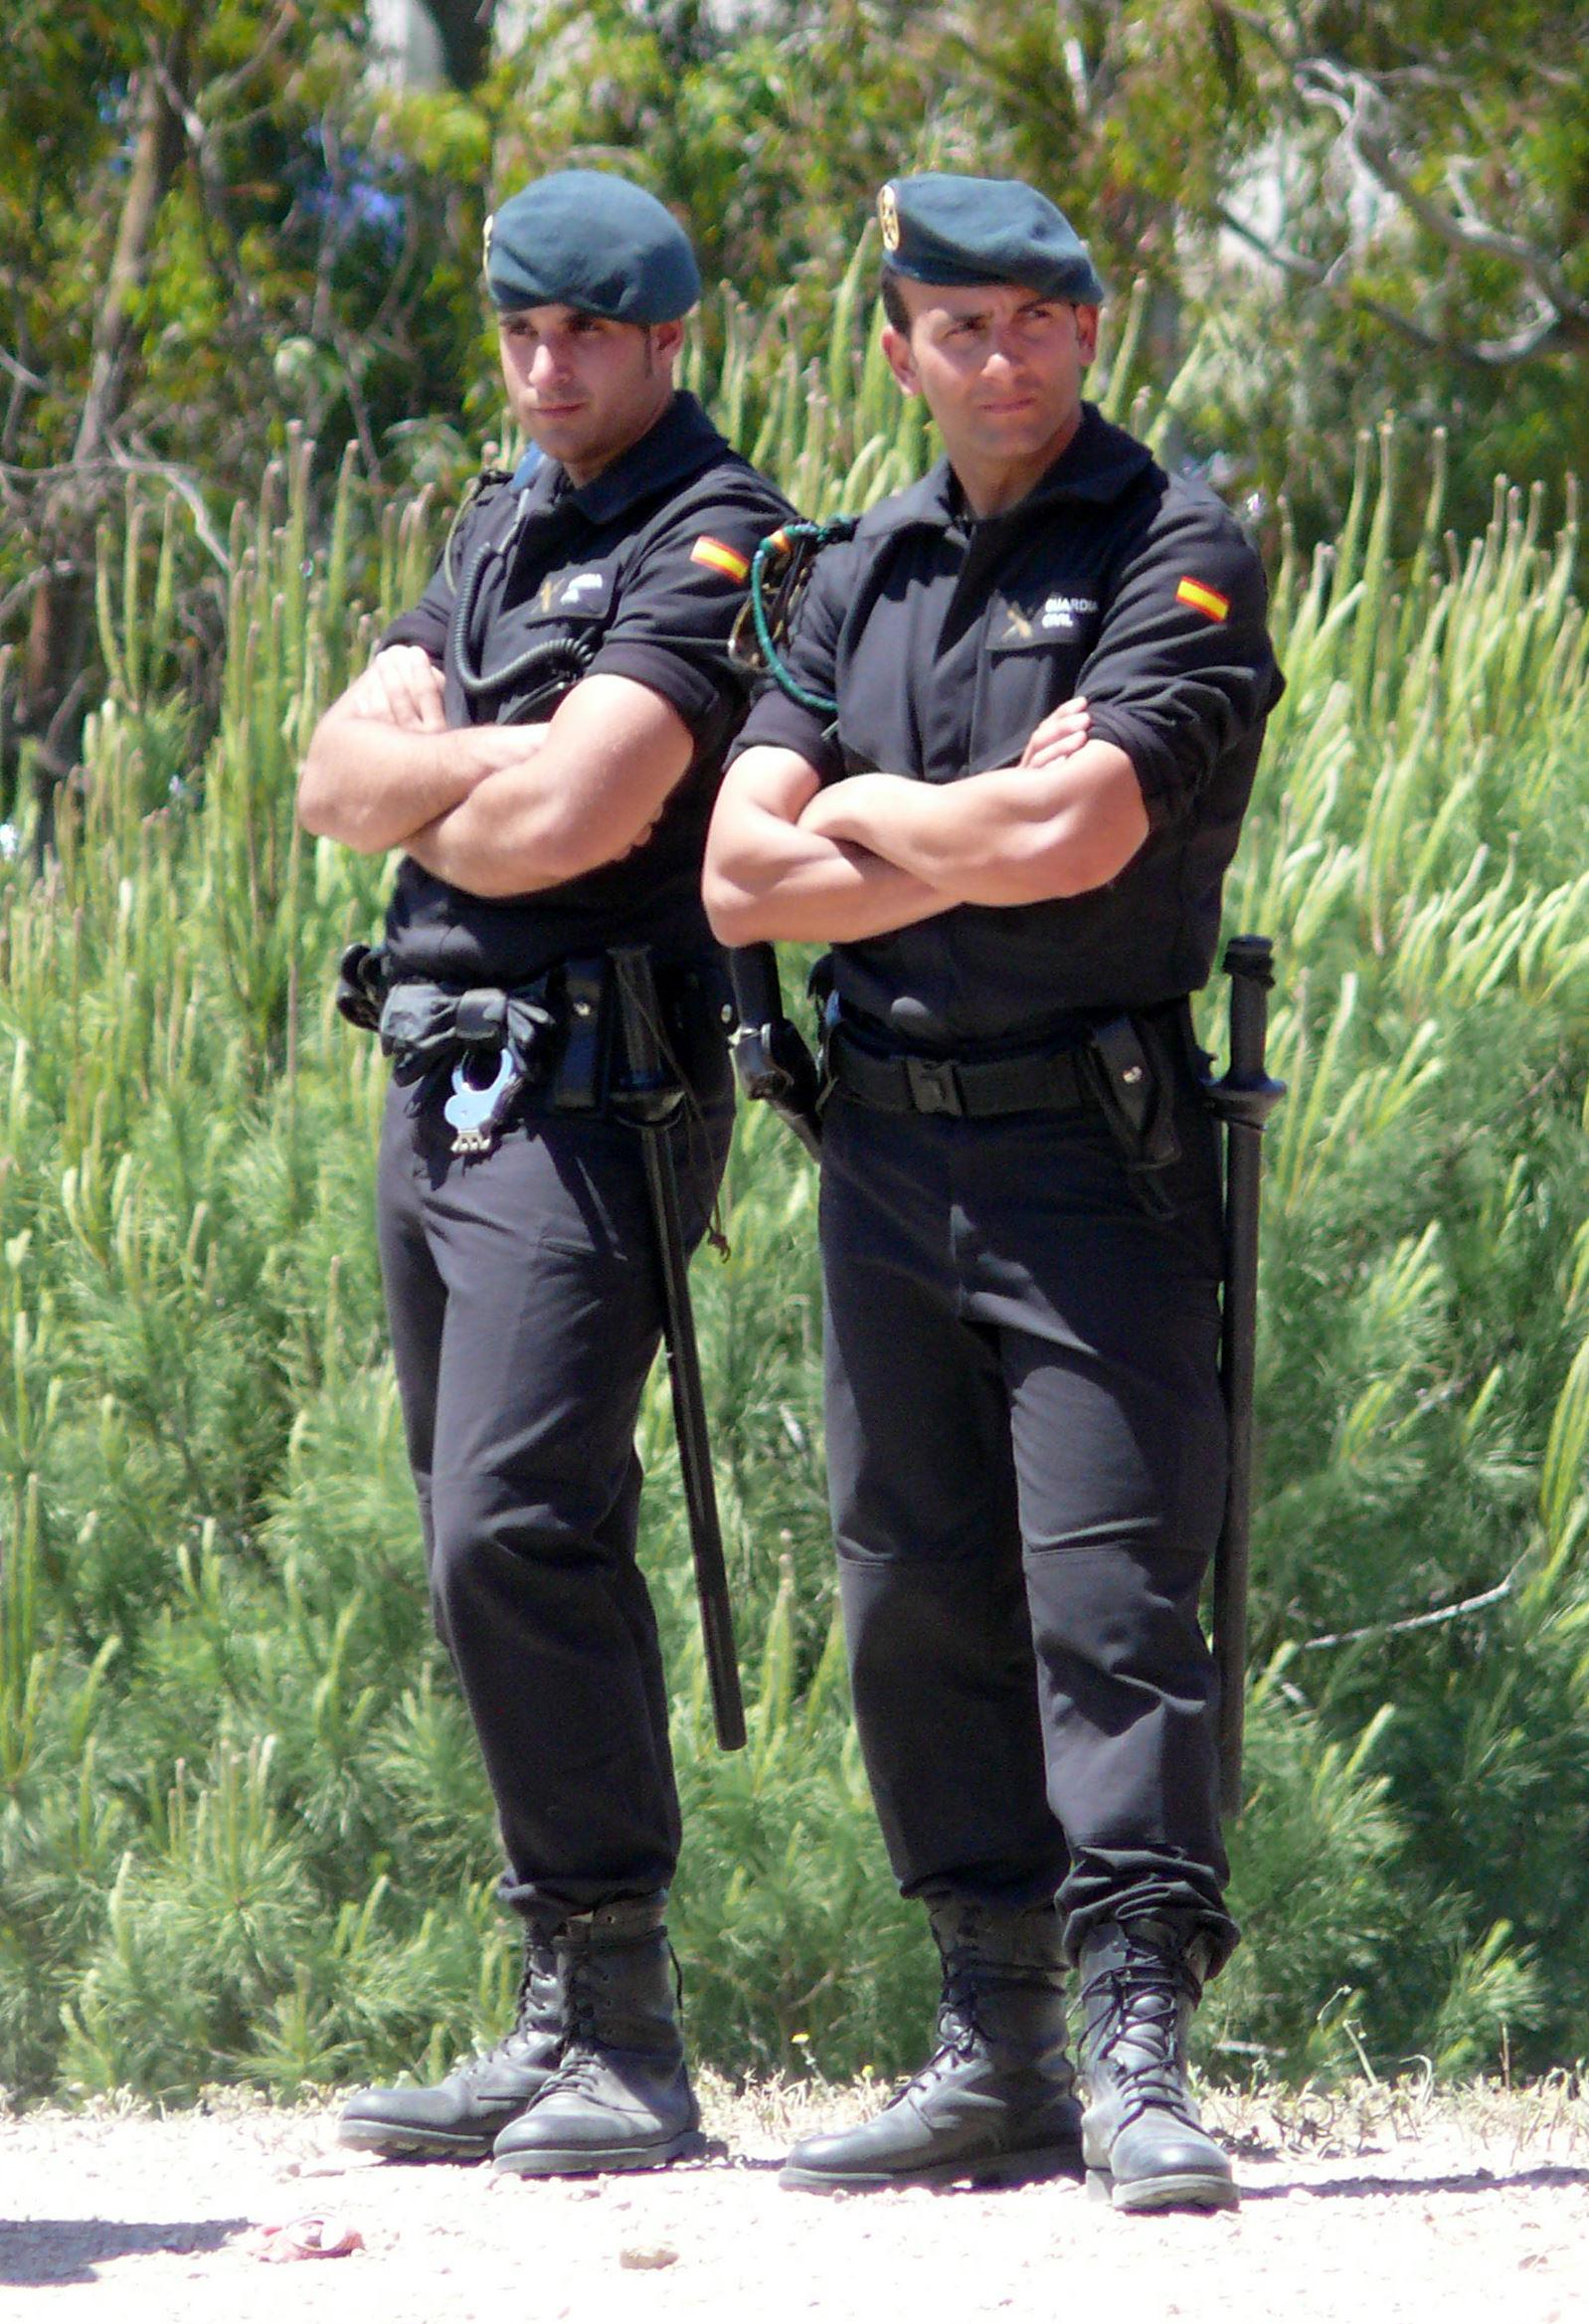 Two Guardia Civil officers | Source: Flickr